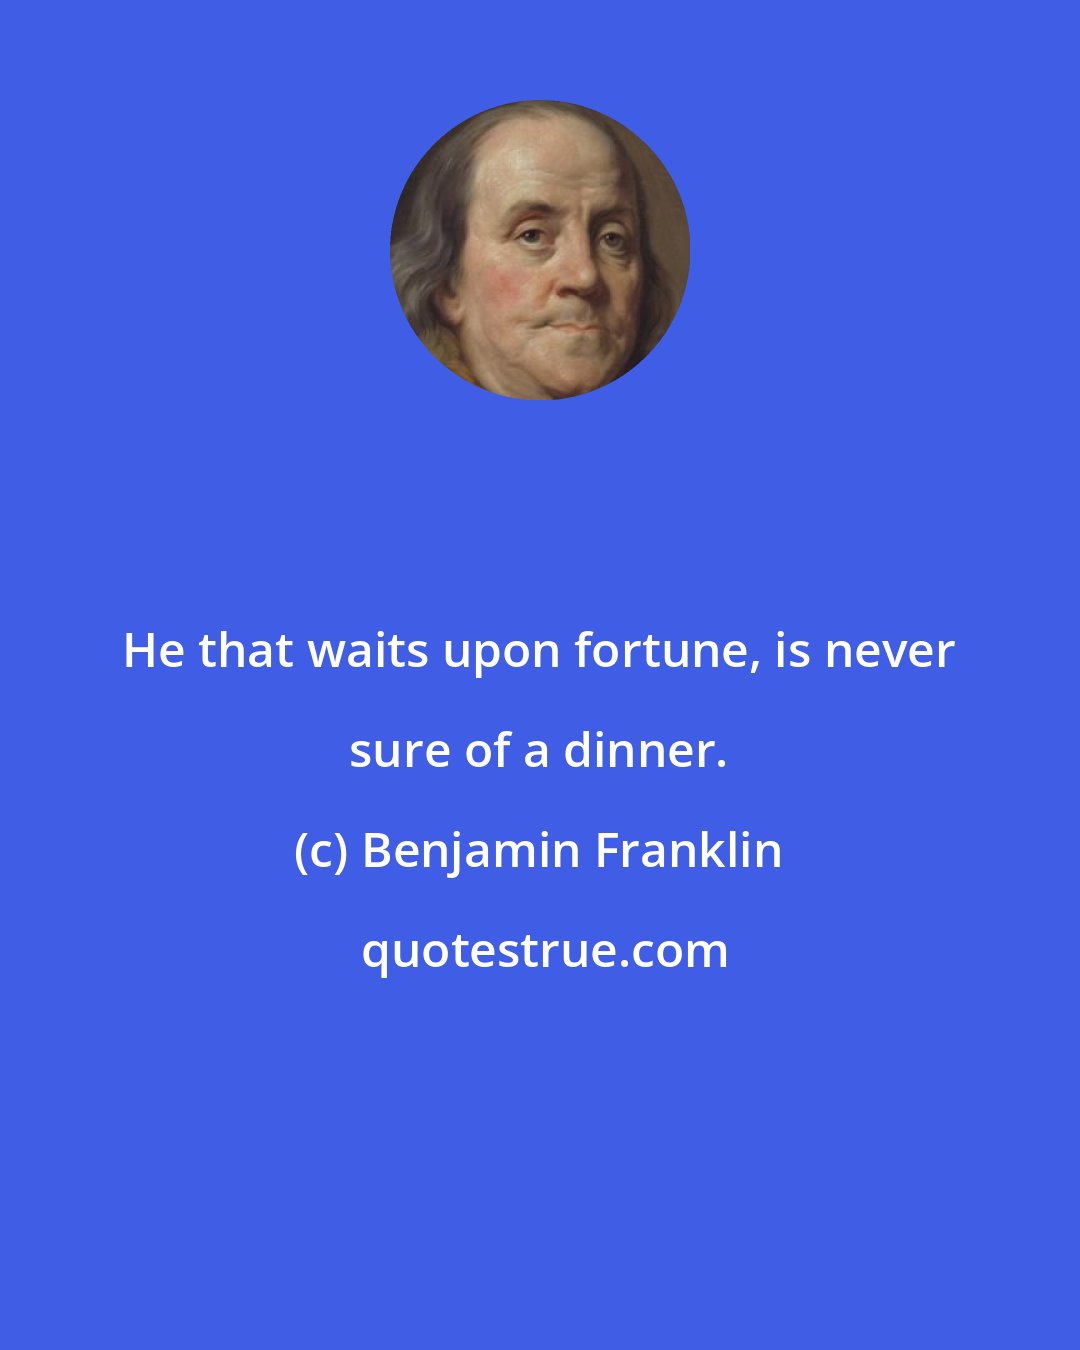 Benjamin Franklin: He that waits upon fortune, is never sure of a dinner.